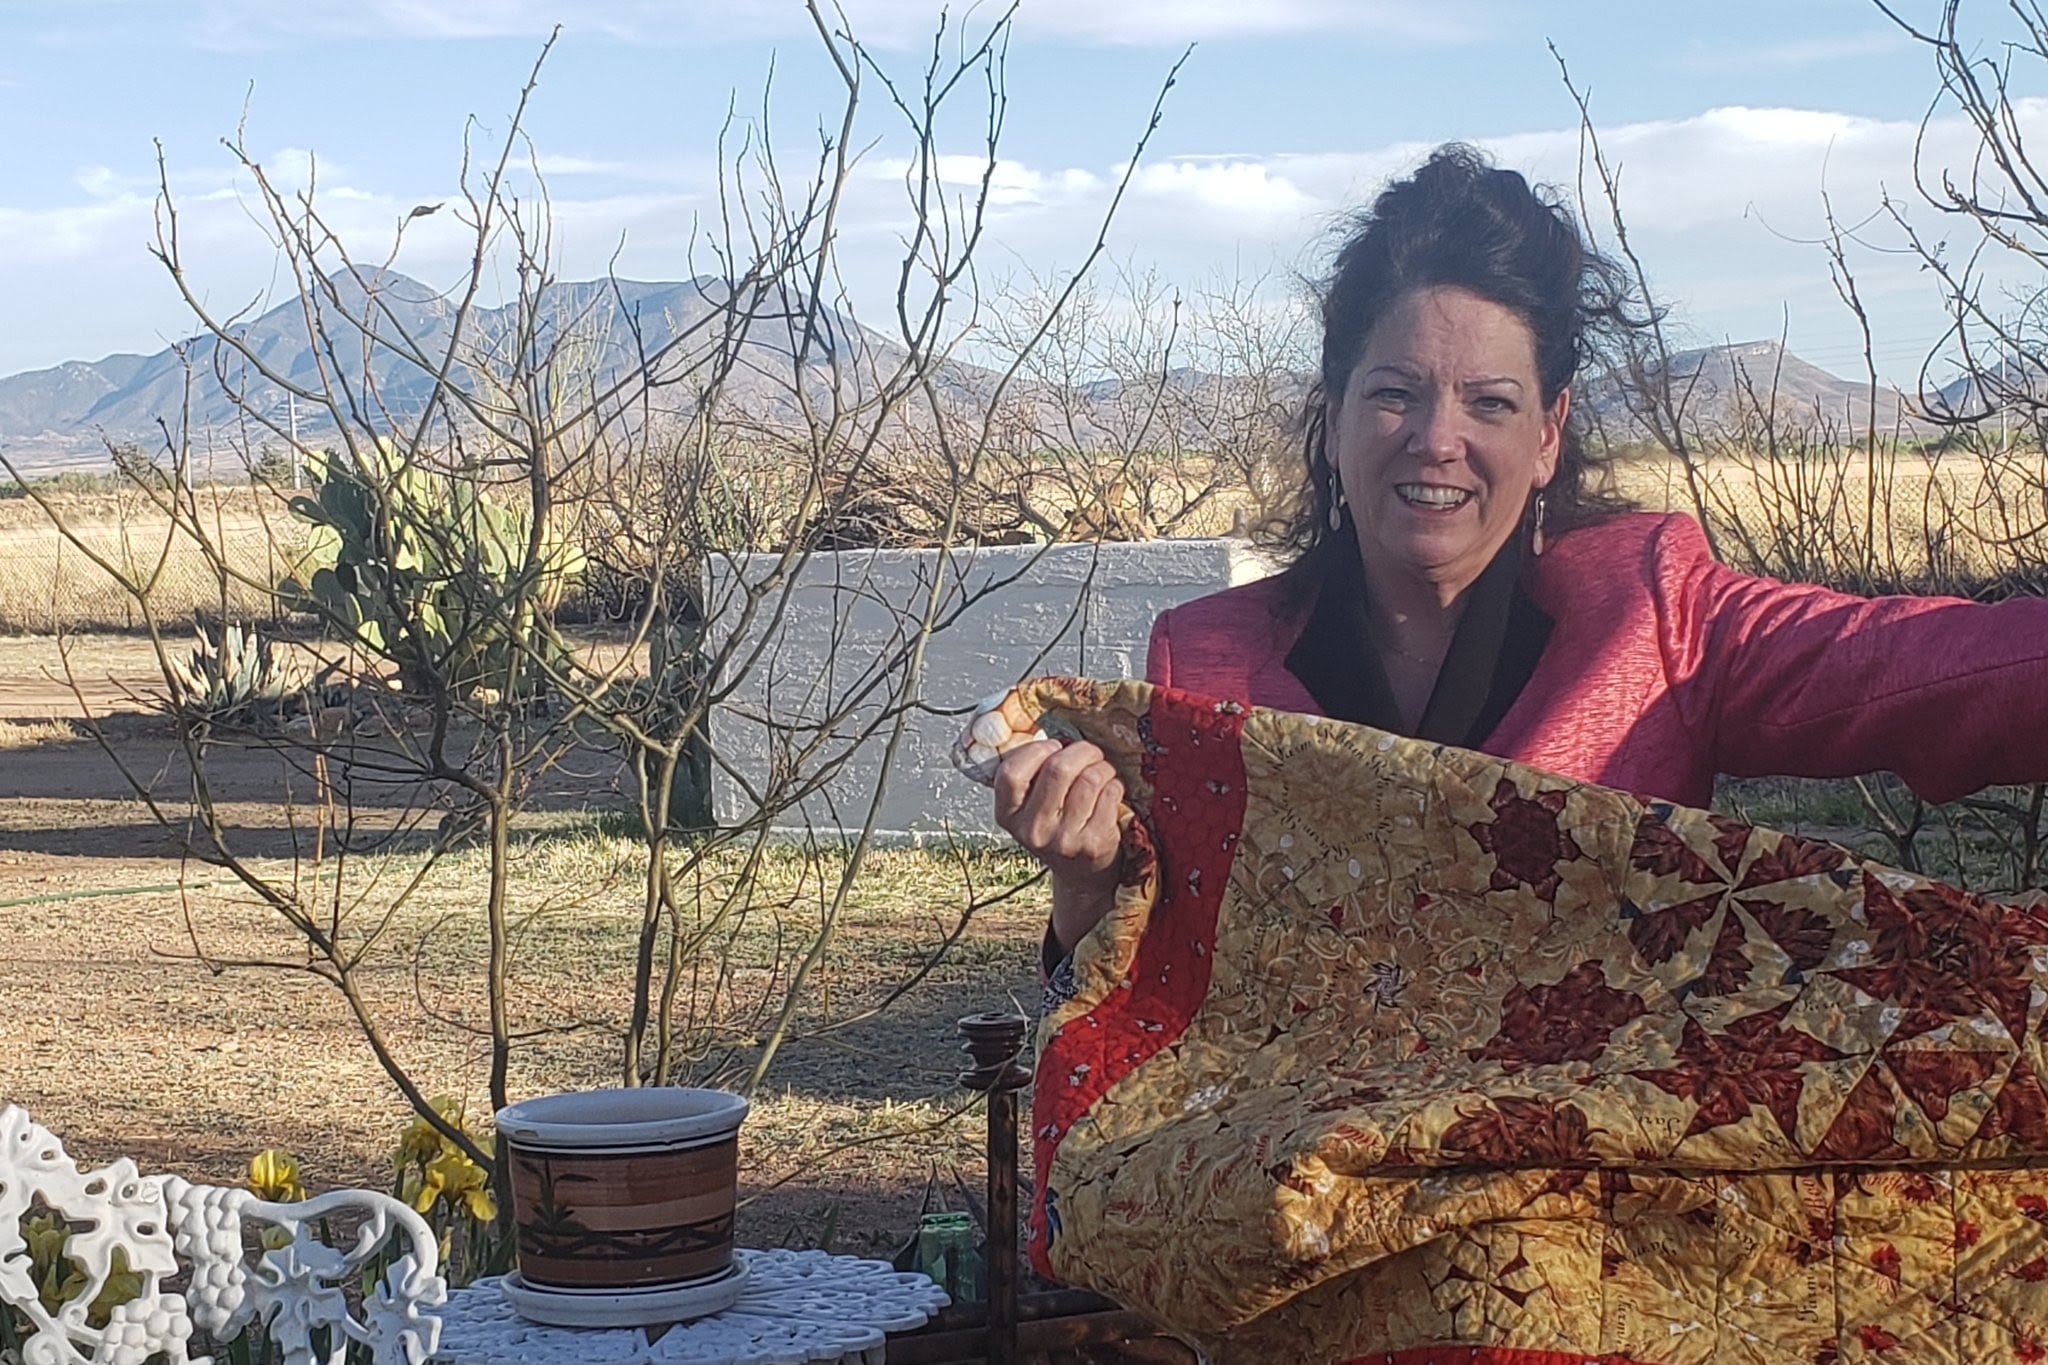 A woman seated outside holding a quilt with mountains in the background